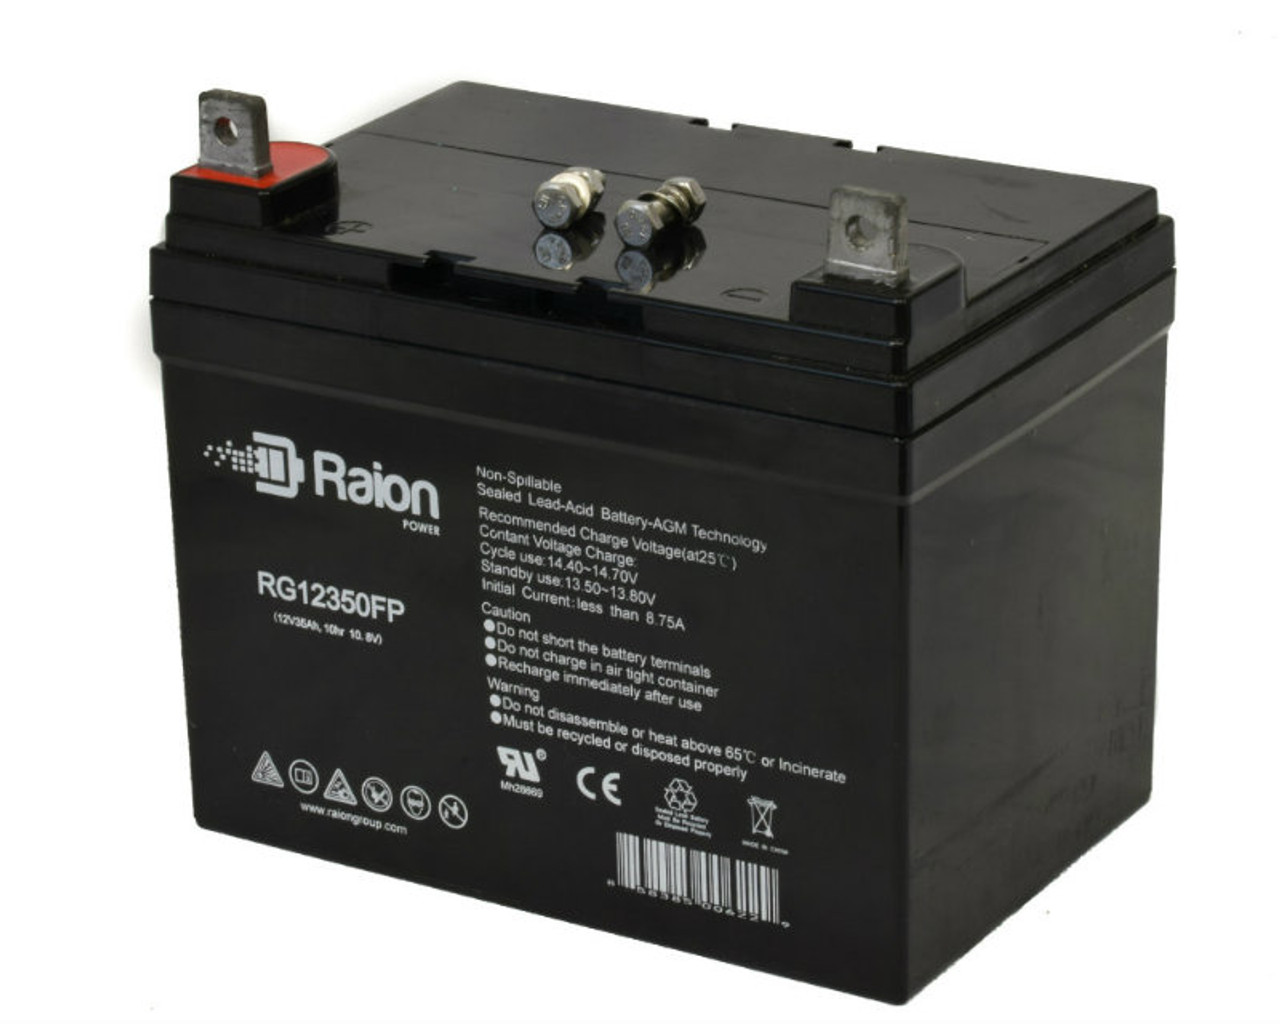 Raion Power Replacement 12V 35Ah RG12350FP Mobility Scooter Battery for Amigo Mobility RD Series